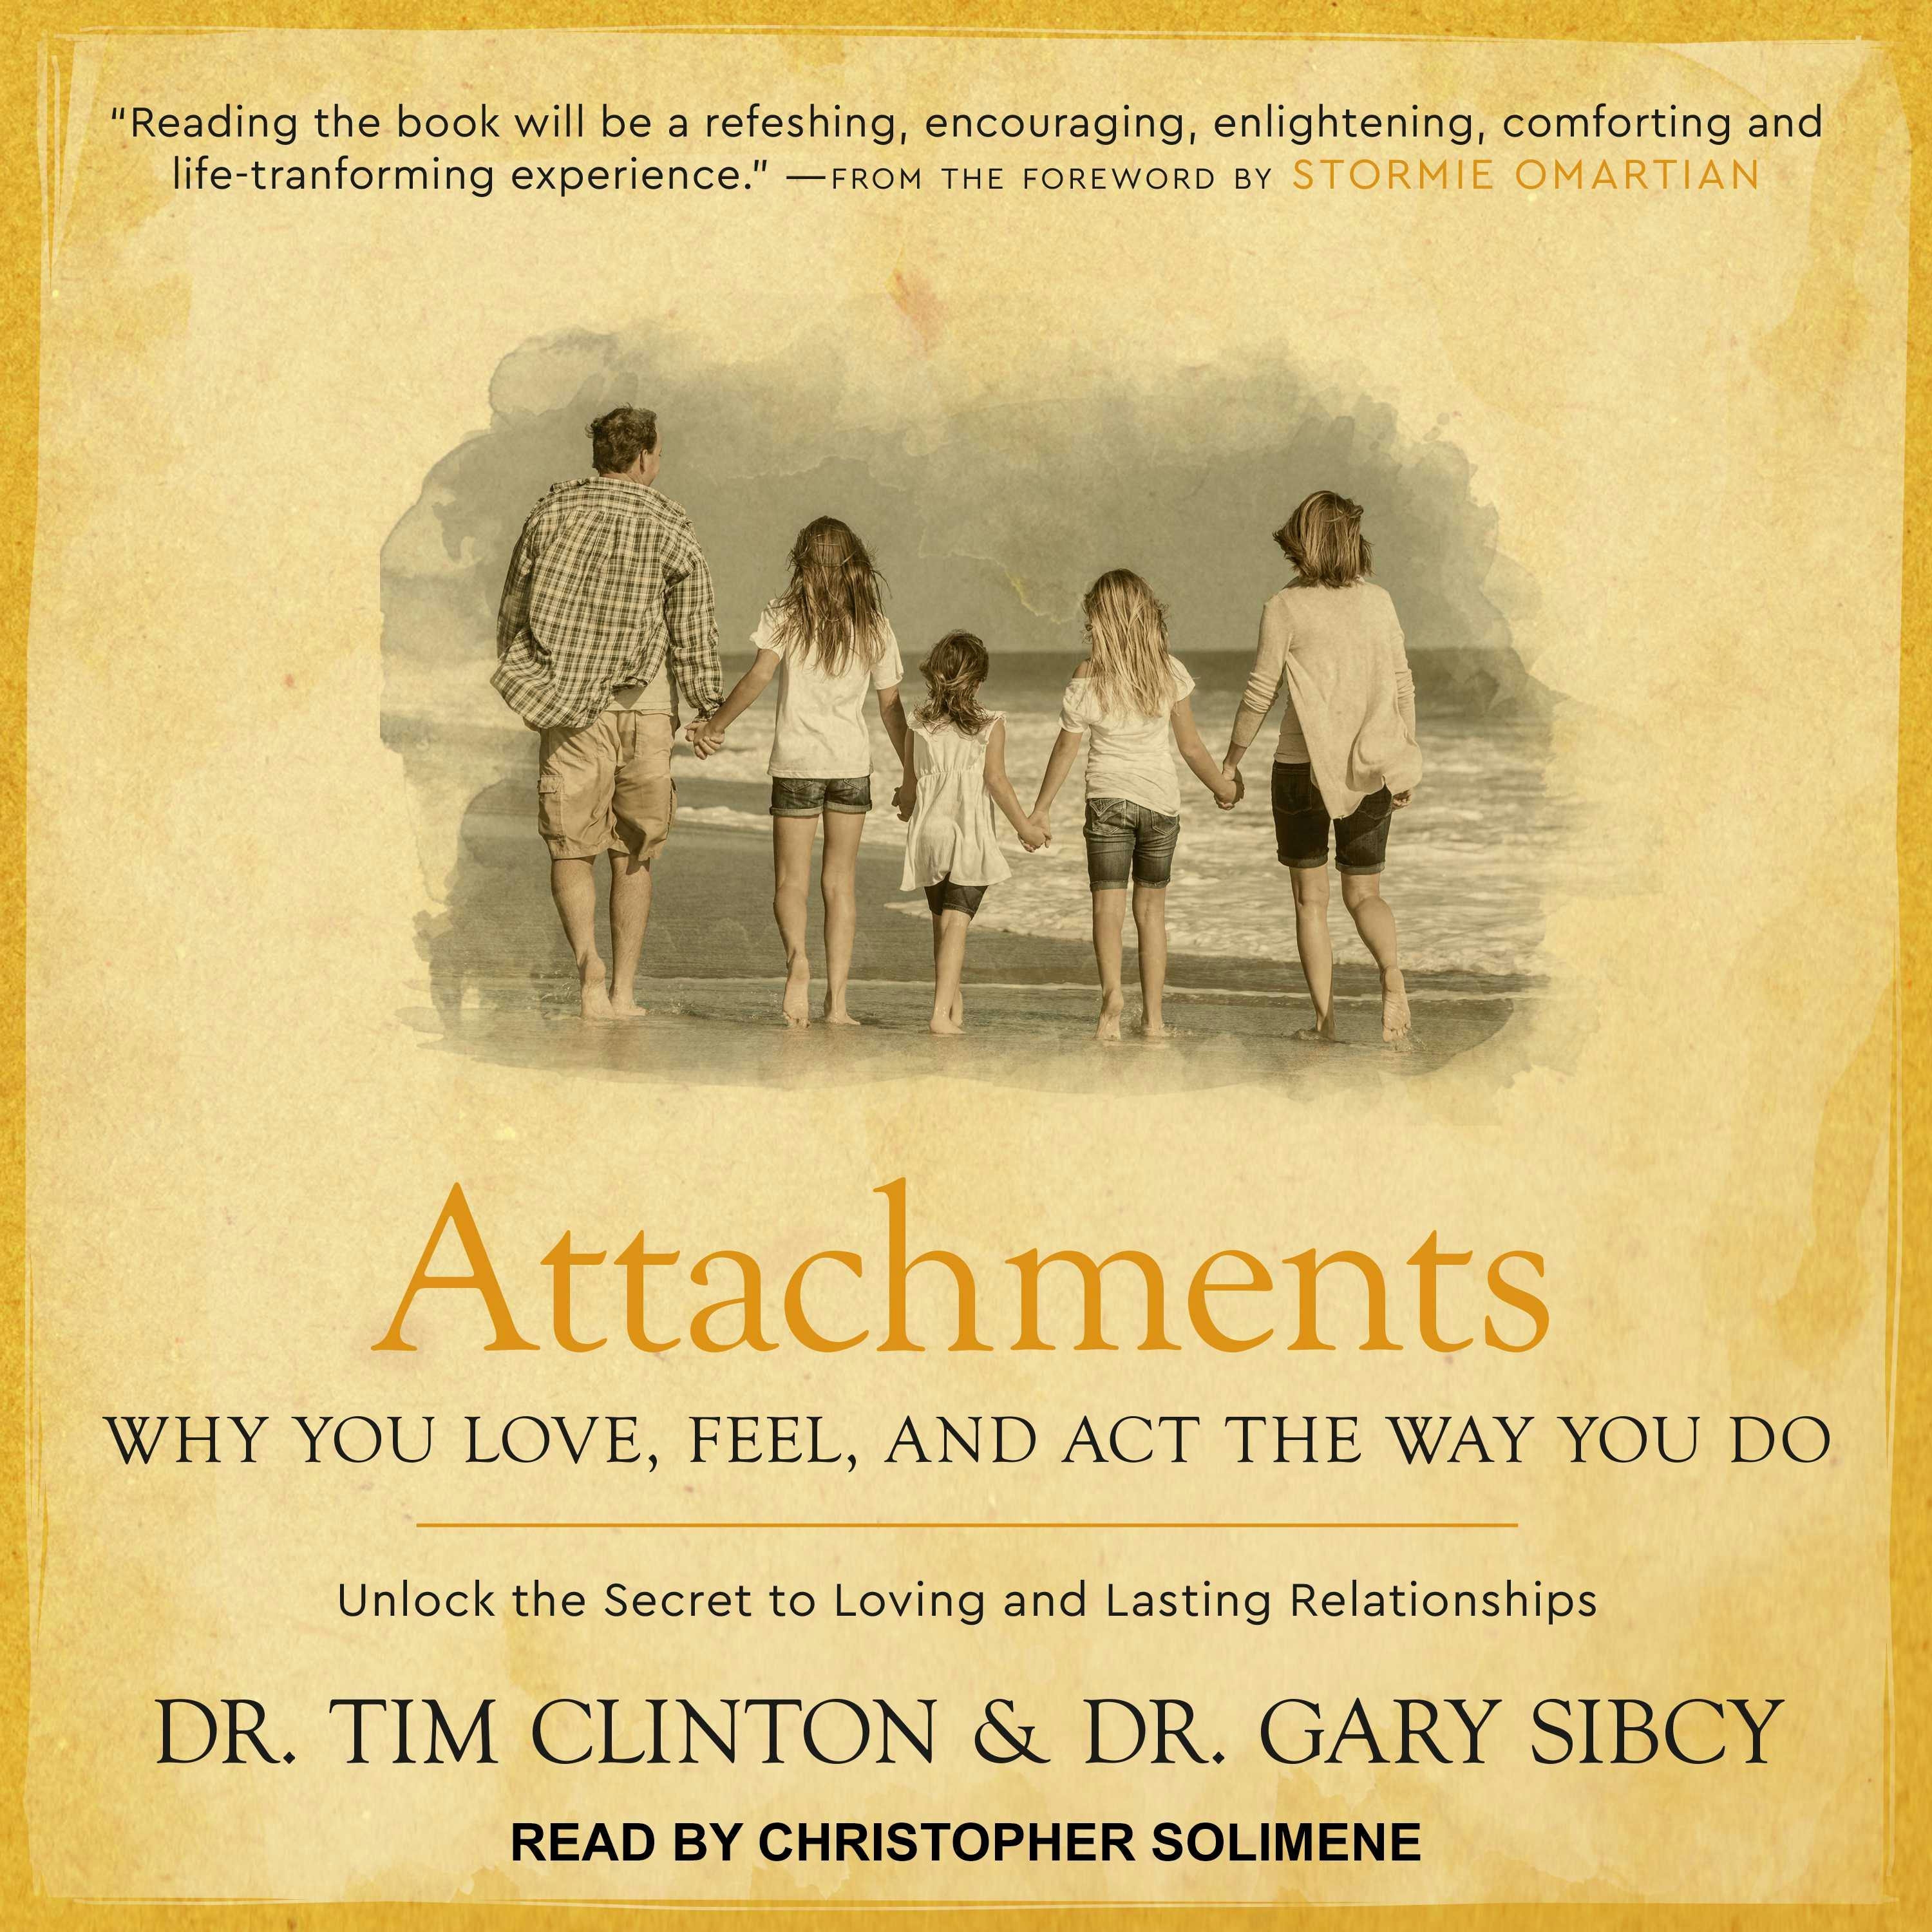 Attachments: Why You Love, Feel, and Act the Way You Do - Dr. Gary Sibcy, Dr. Tim Clinton